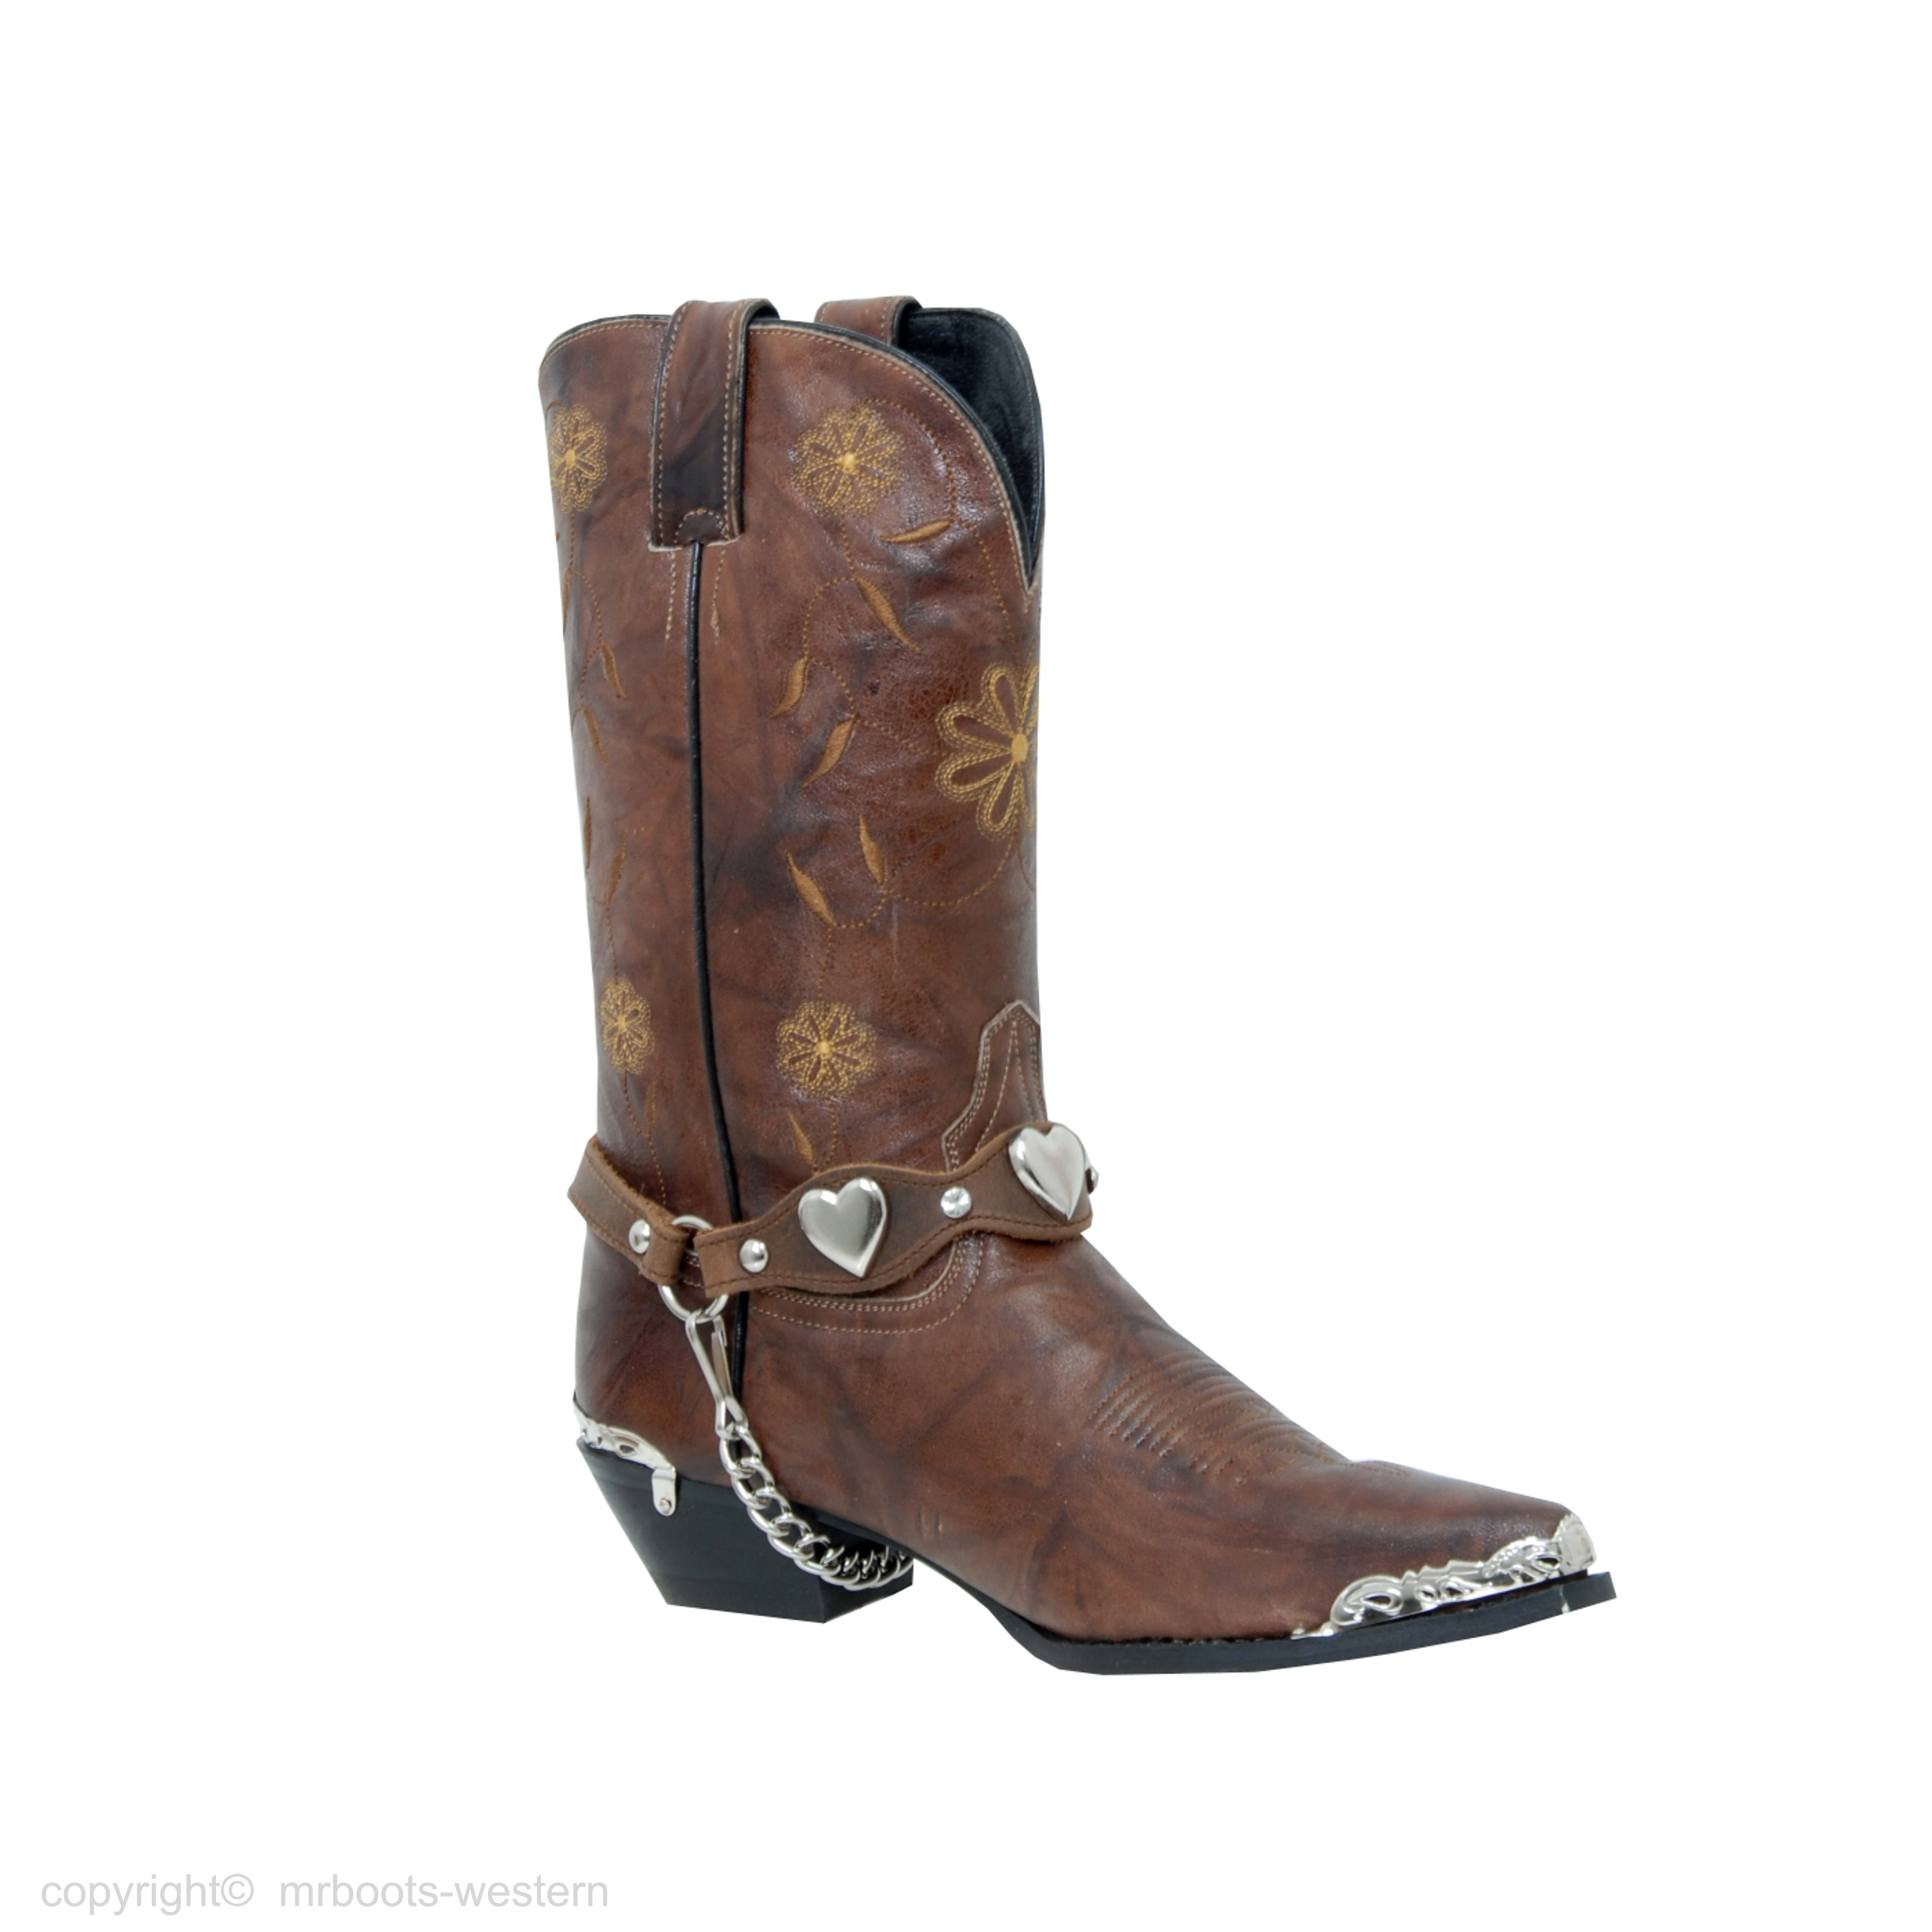 ALM-900-ST-BRN Boot Strap Brown Leather Rhinestones & Hearts